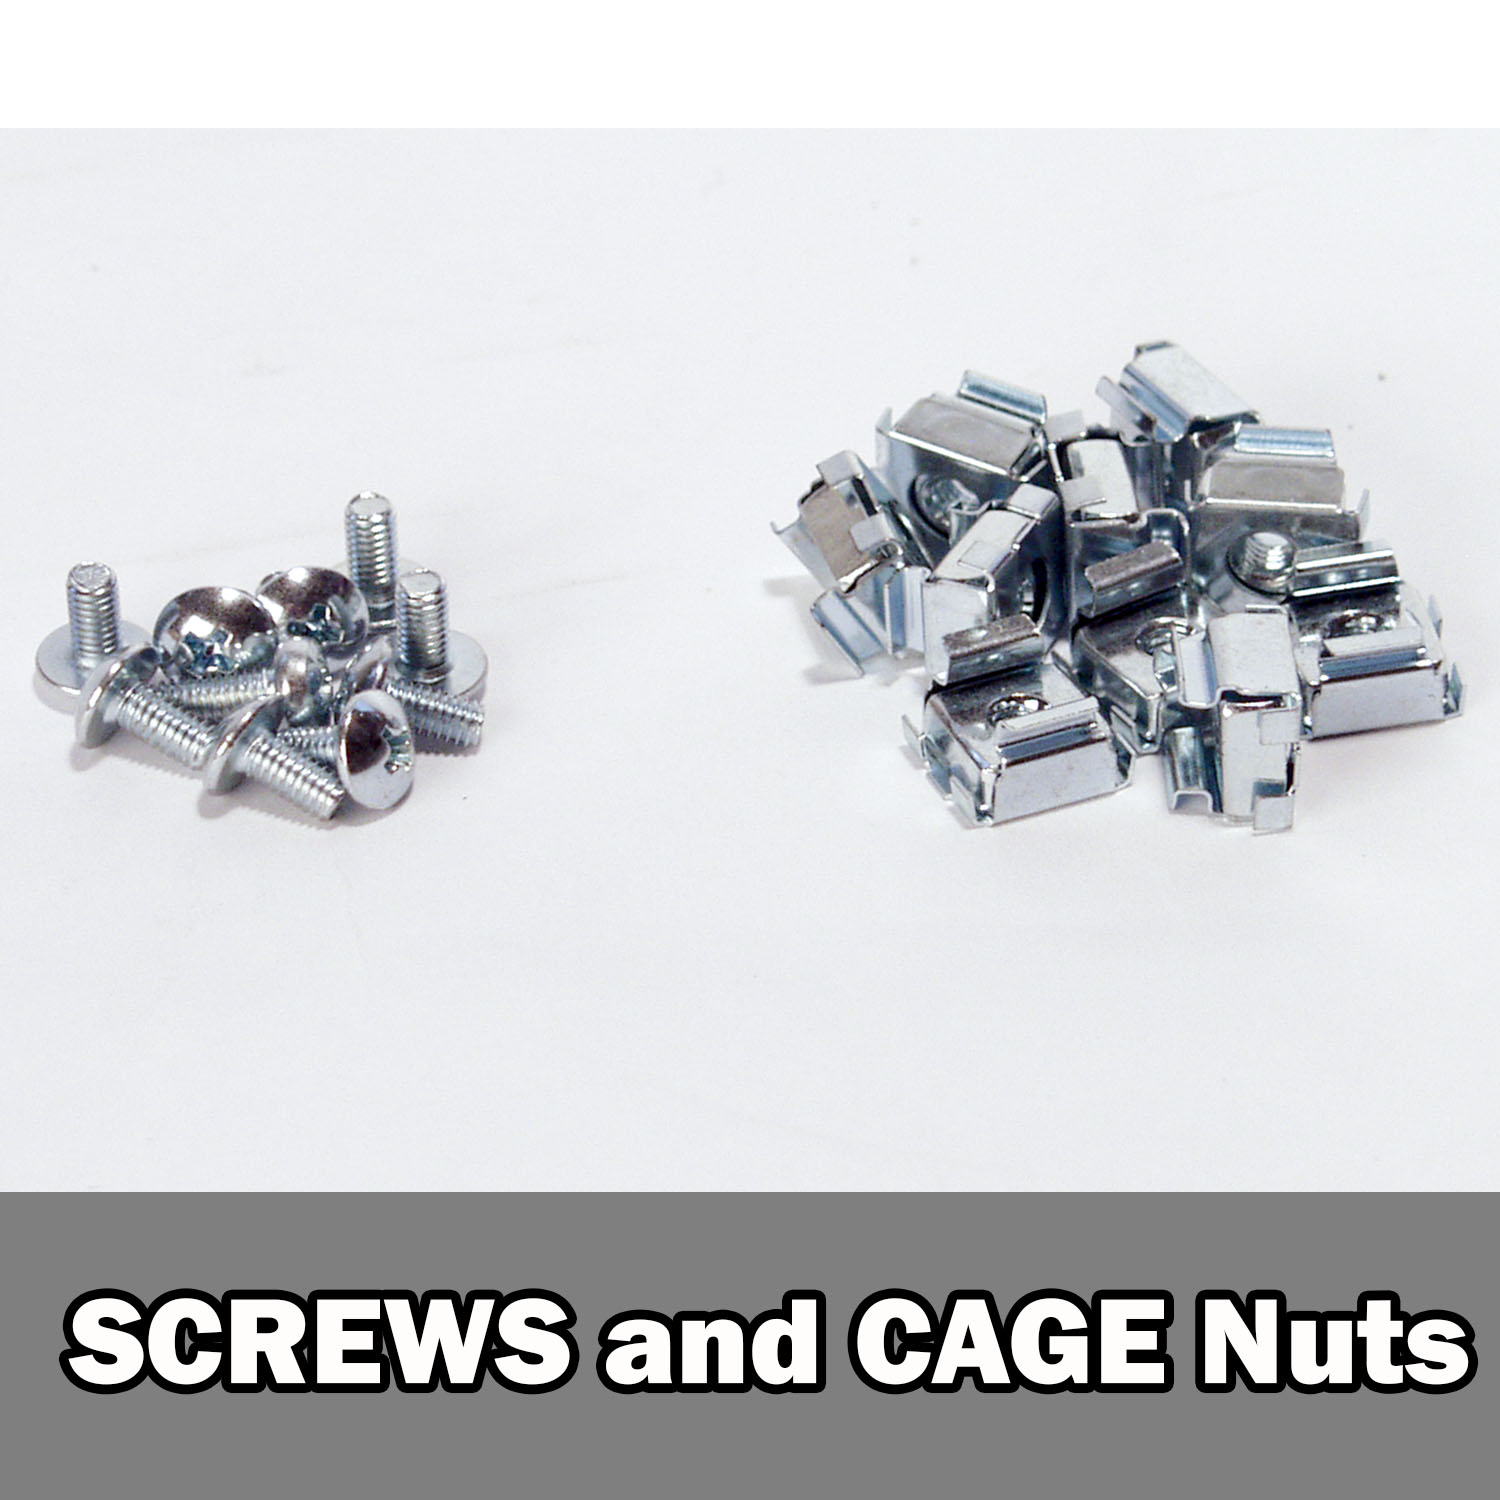 Screws and Cage Nuts